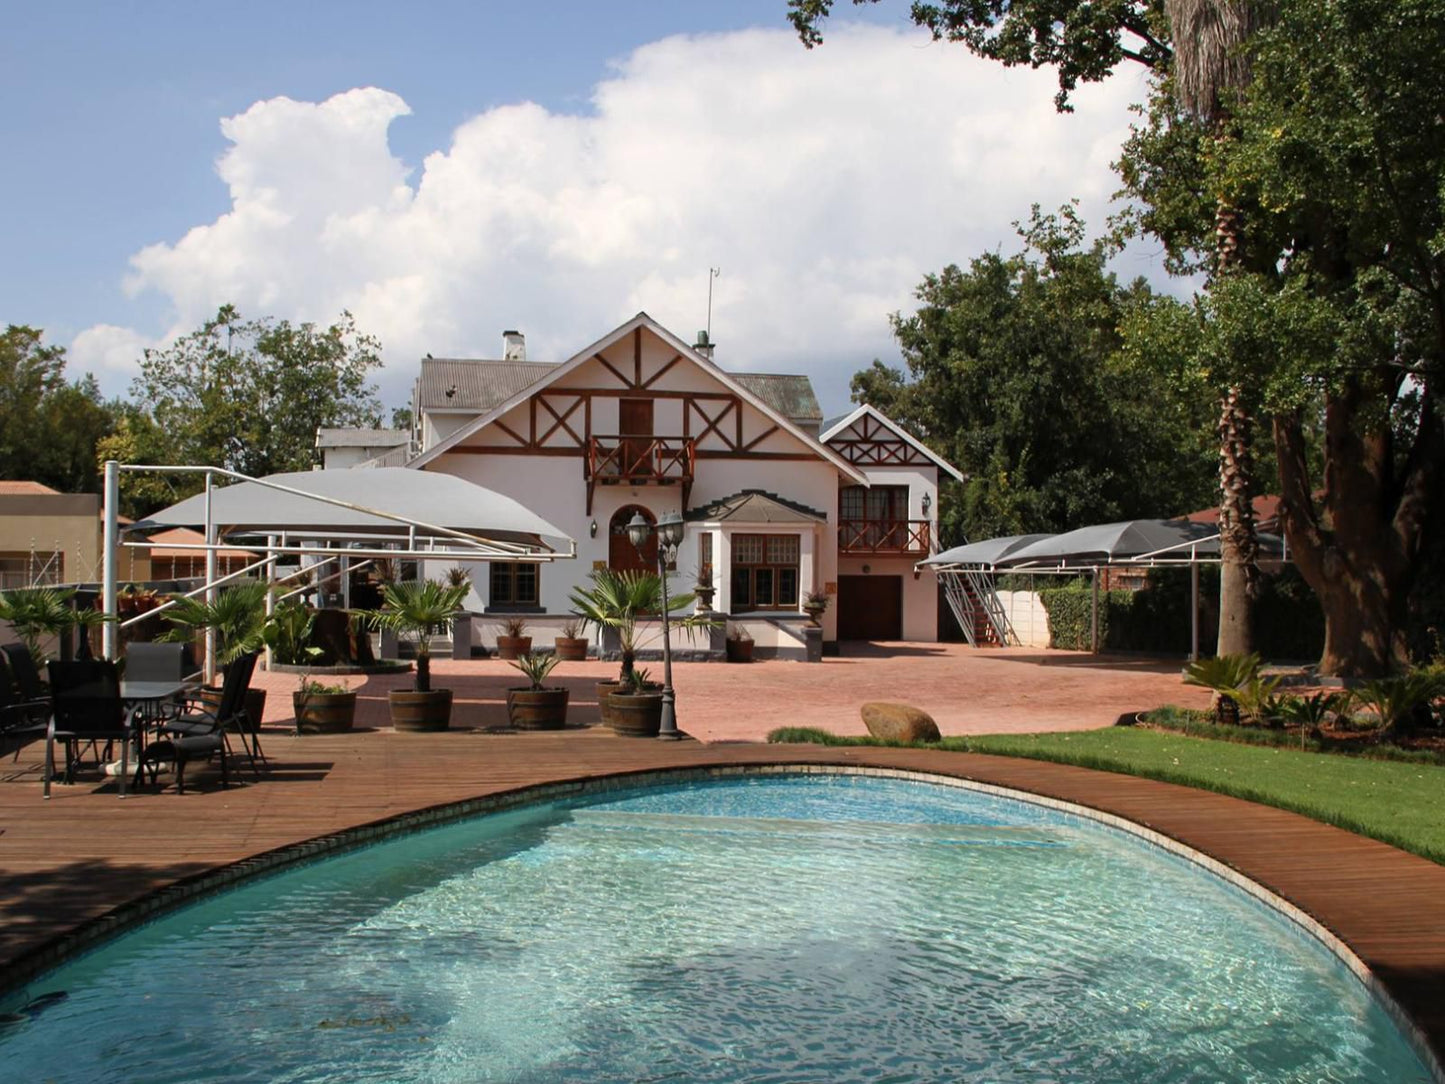 The Oak Potch Guesthouse Die Bult Potchefstroom North West Province South Africa House, Building, Architecture, Swimming Pool